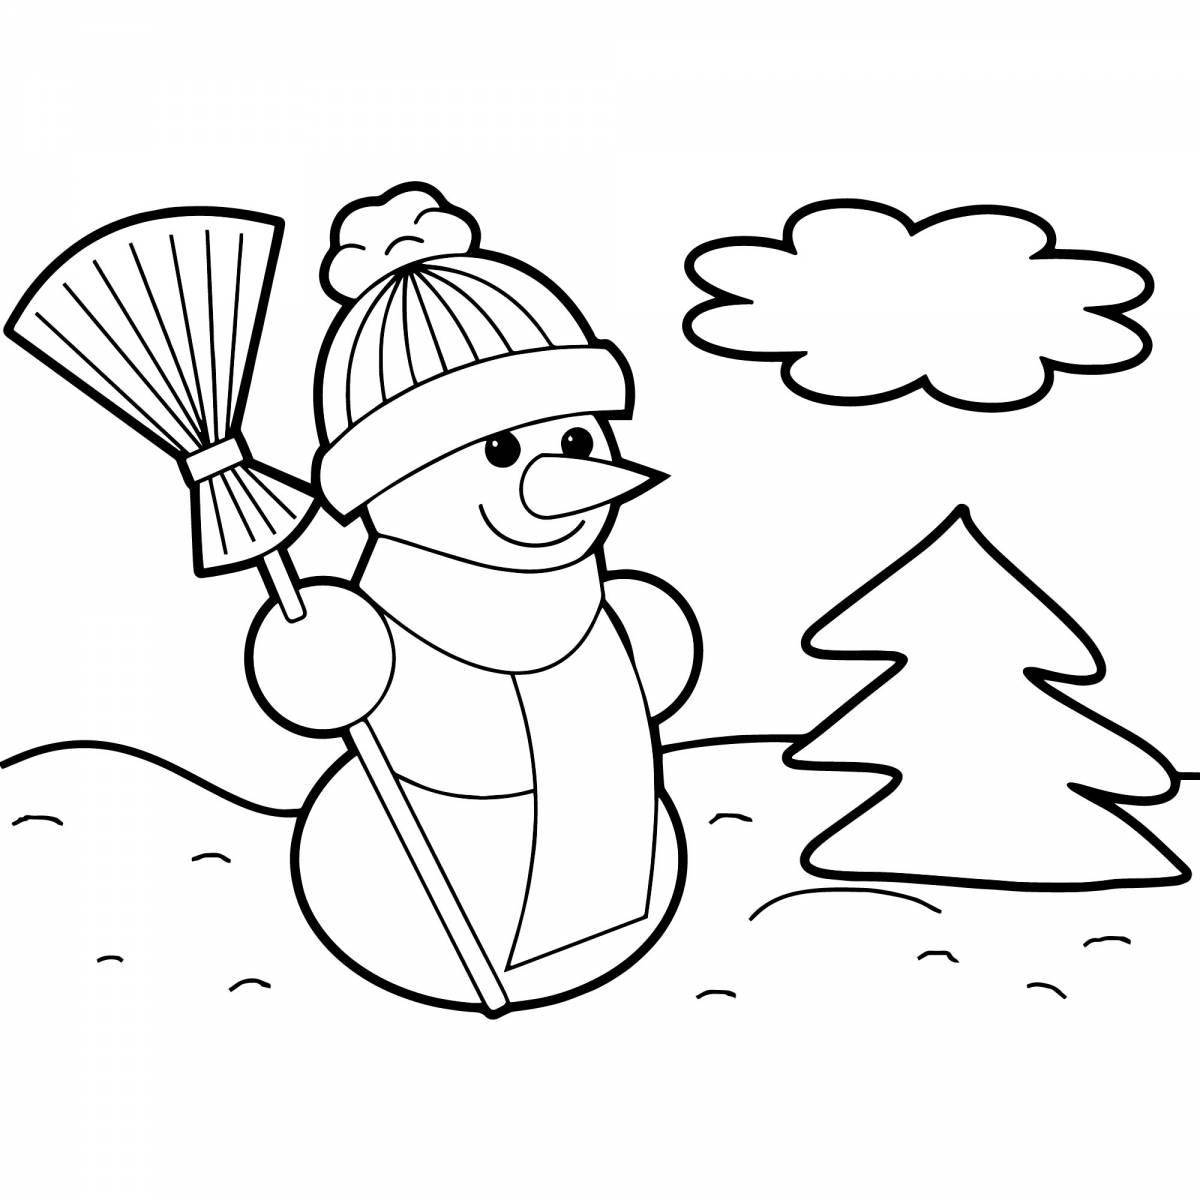 Glitter snowman day coloring page